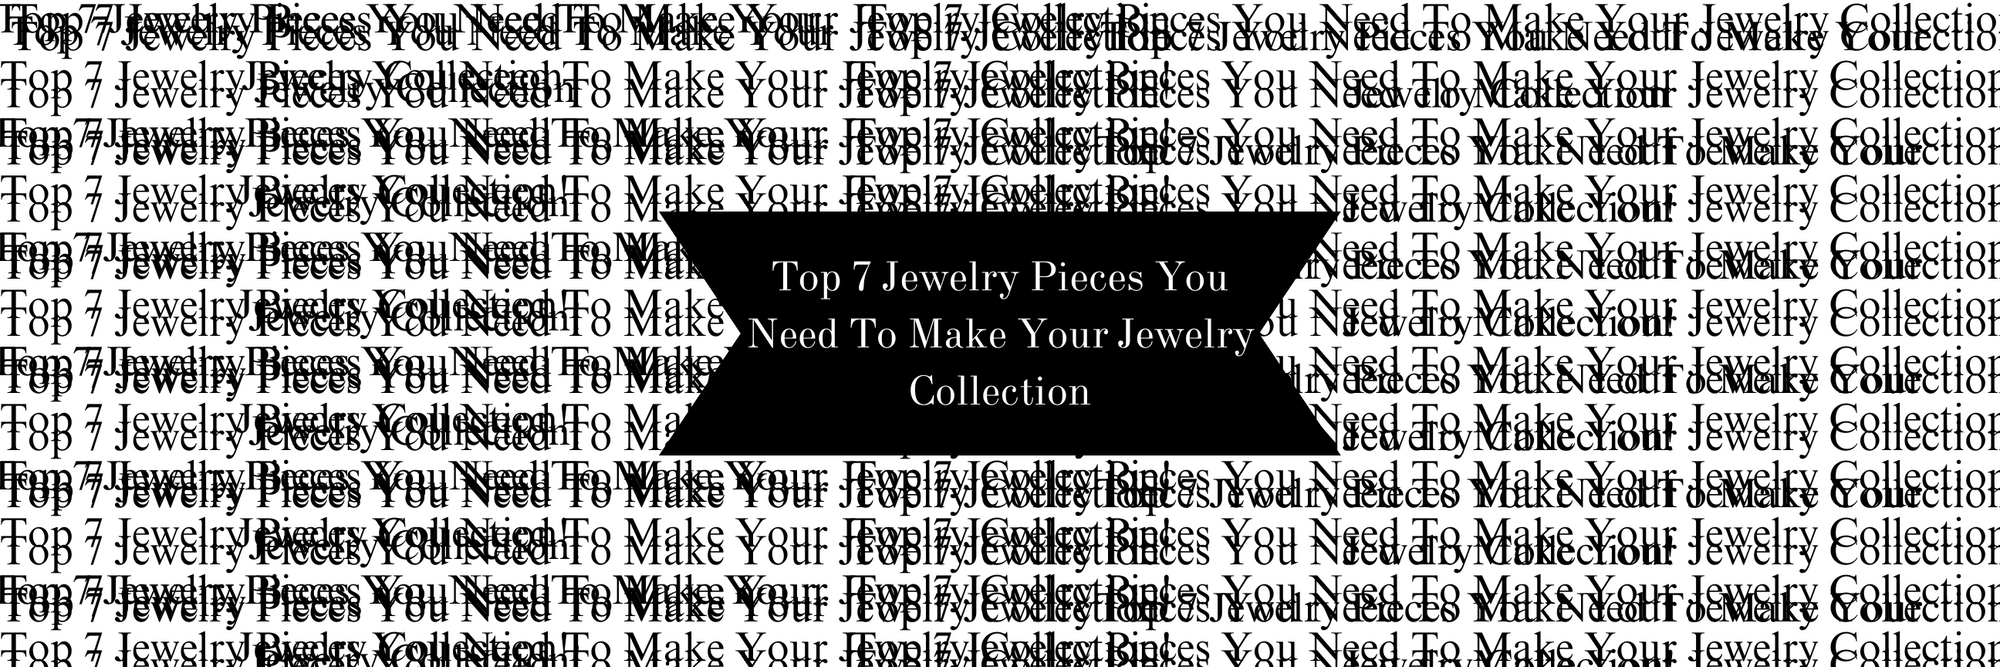 Top 7 Jewelry Pieces You Need To Make Your Jewelry Collection!